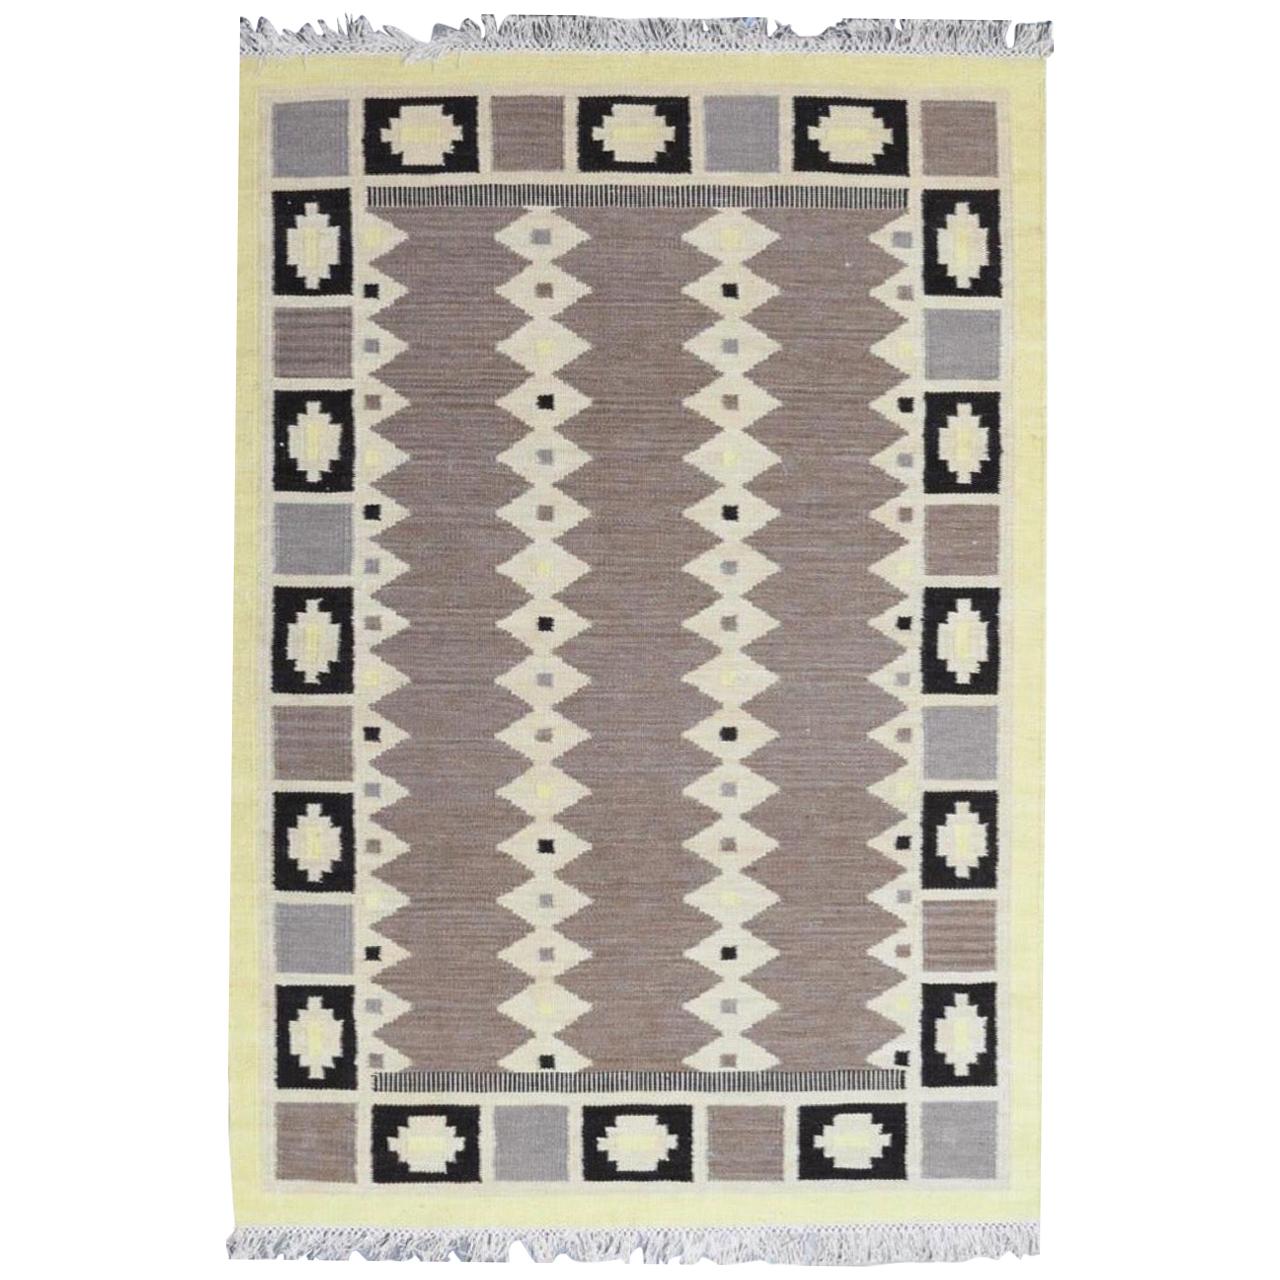 New Scandinavian Design Handwoven Flat Rug Kilim, size 6ft 6in x 9ft 10in For Sale